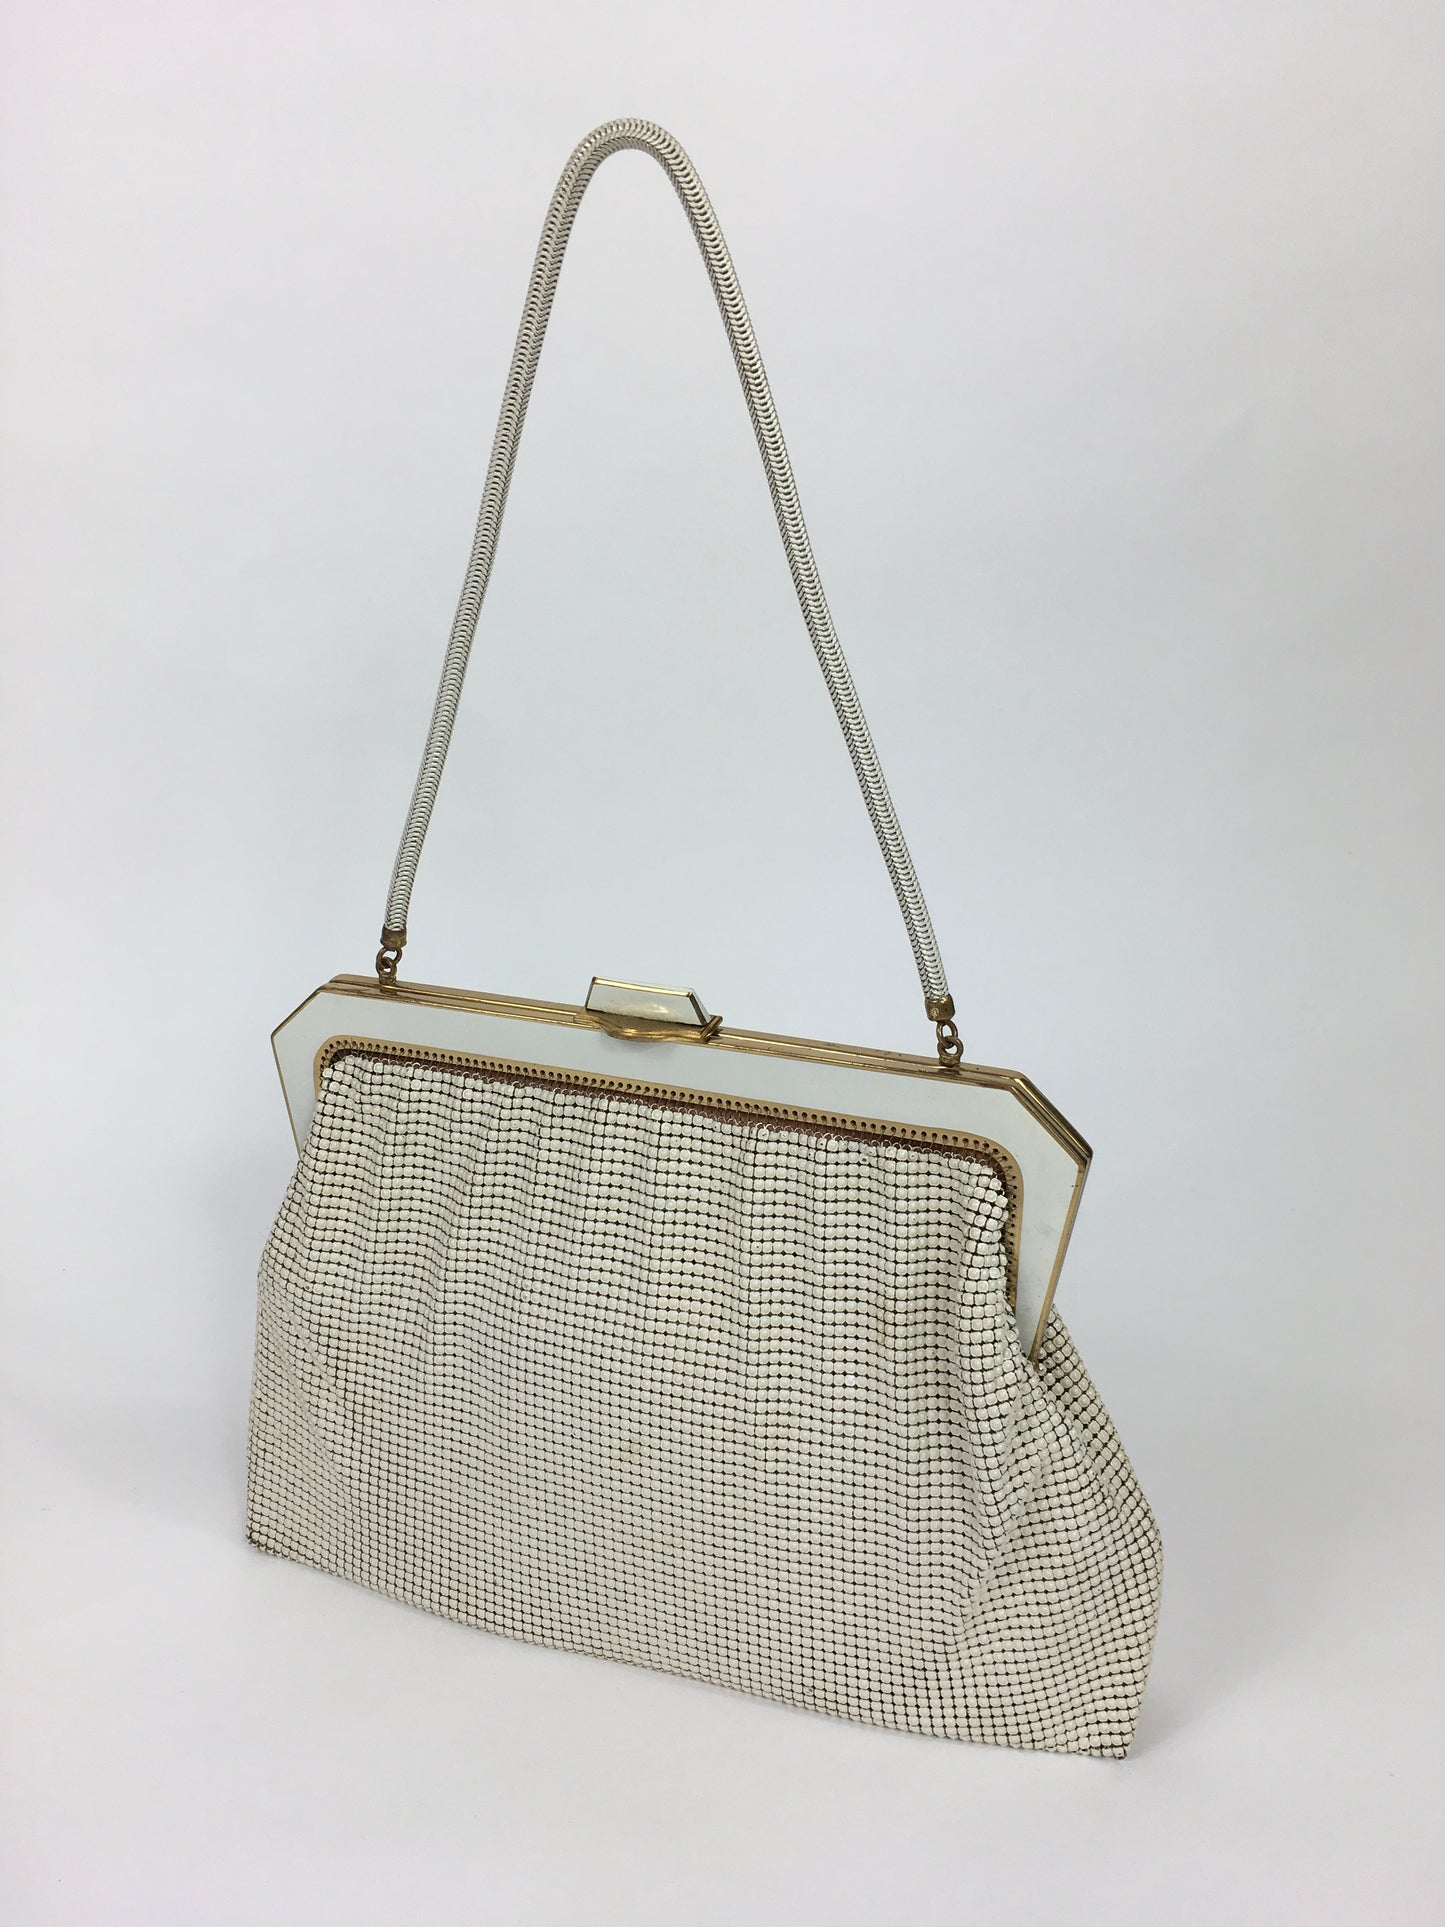 Original Late 1950s Early 1960’s Chain Bag - In a Fabulous Bright White with Lots of Movement